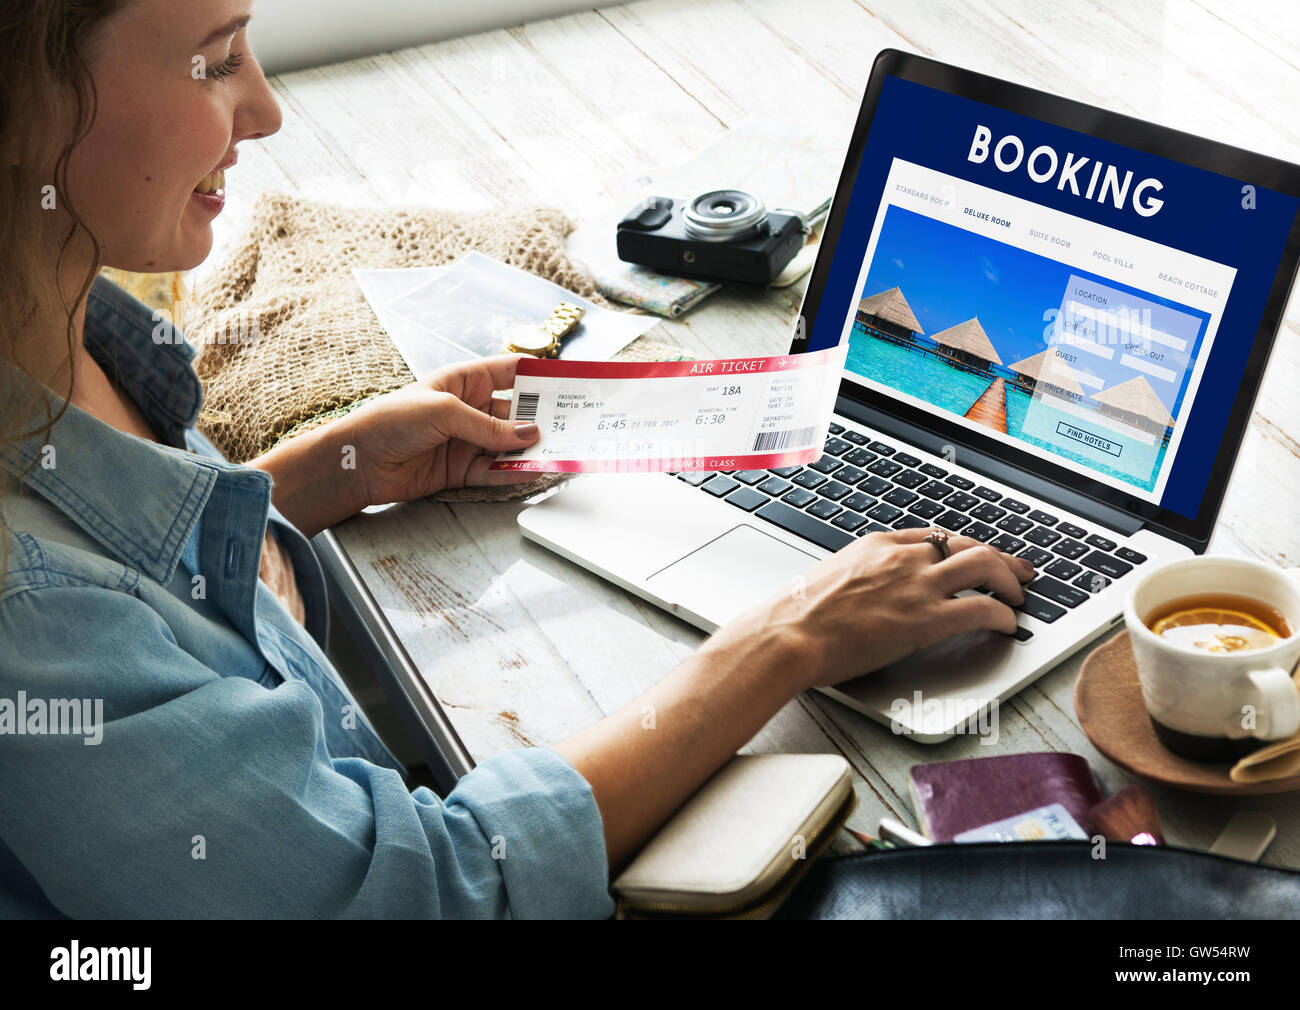 Booking Hotel Reservation Travel Destination Concept Stock Photo